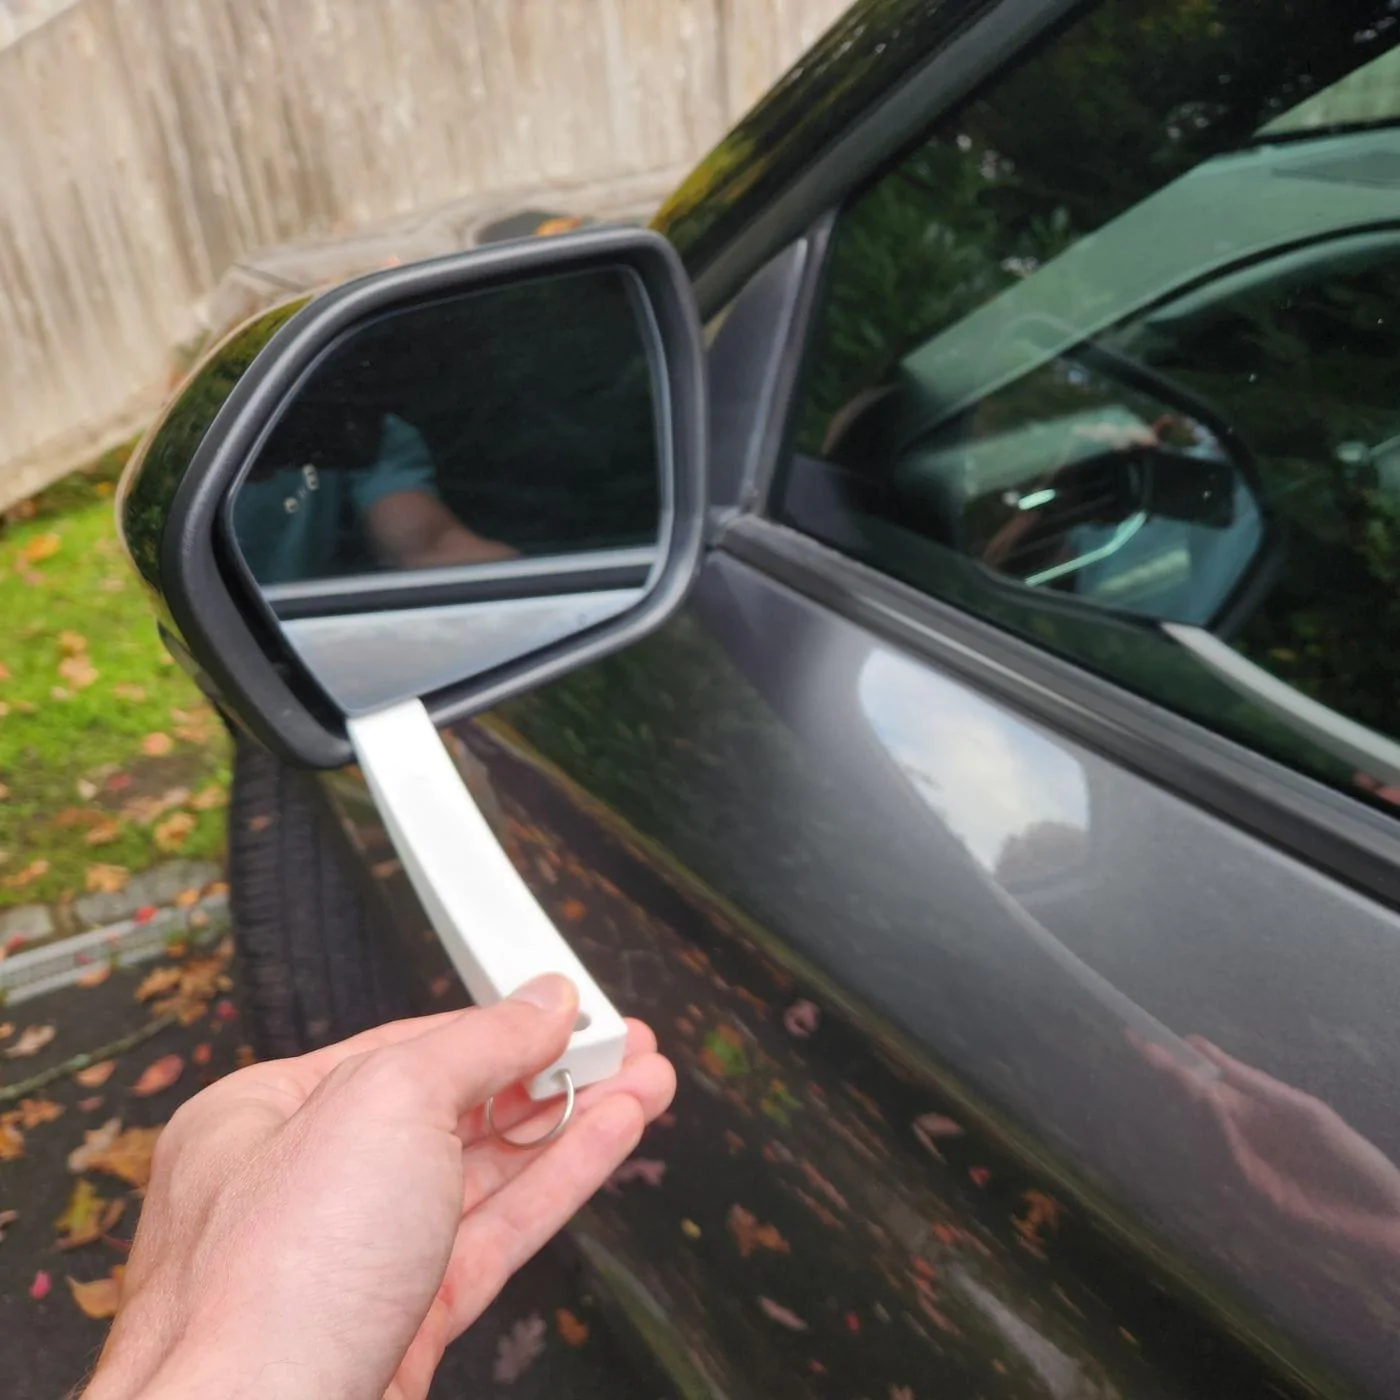 Can I just replace the glass on my side mirror?